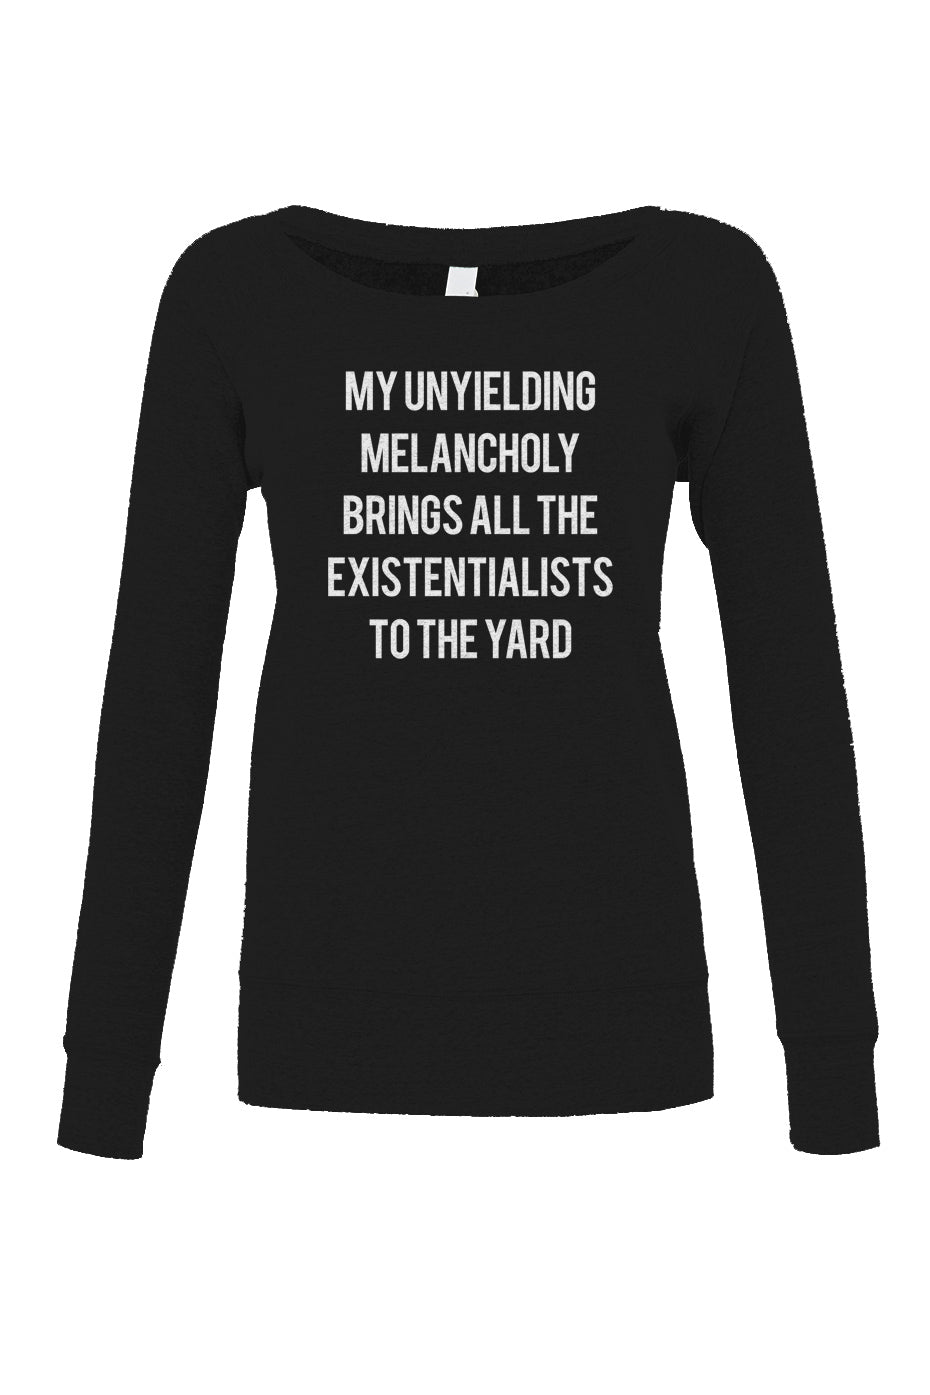 Women's My Unyielding Melancholy Brings All The Existentialists To The Yard Scoop Neck Fleece